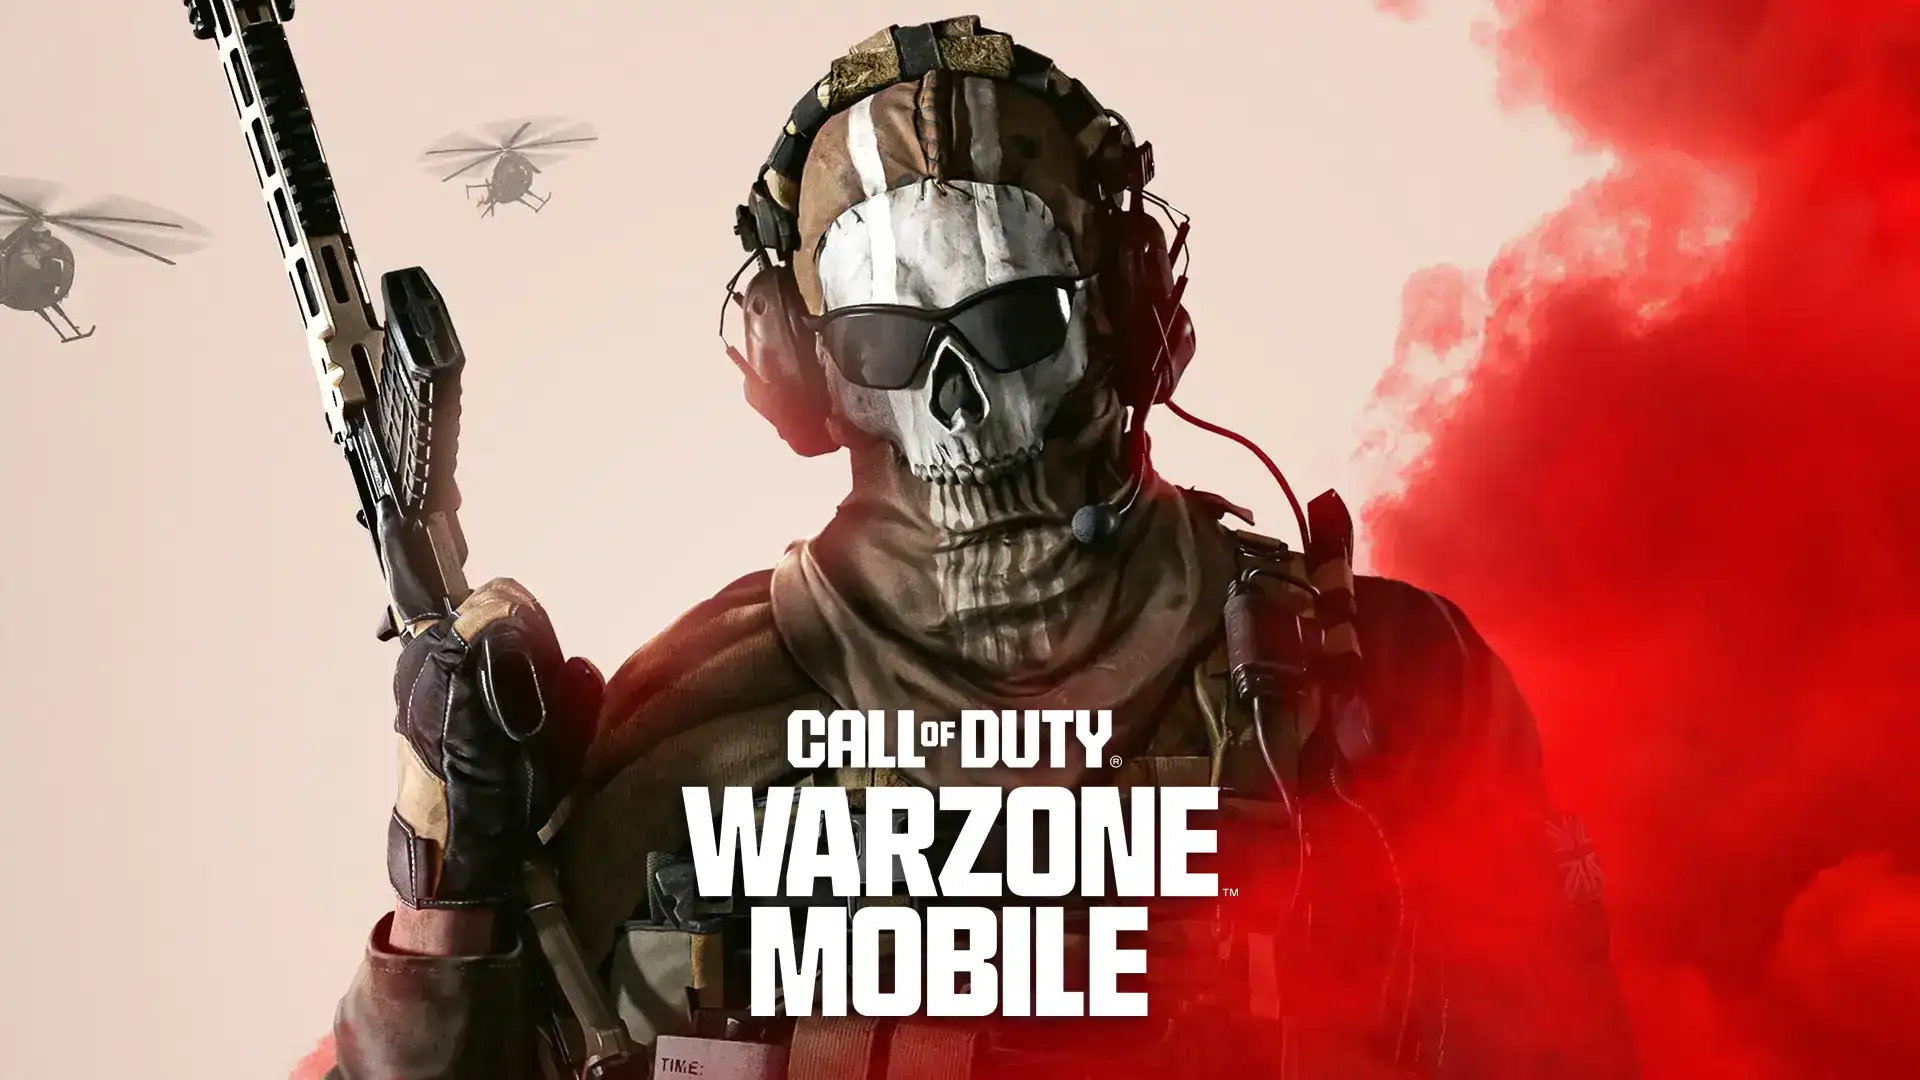 How To Use A Controller On Warzone Mobile (Xbox And PlayStation Controller Pairing Guide For Android And iOS)